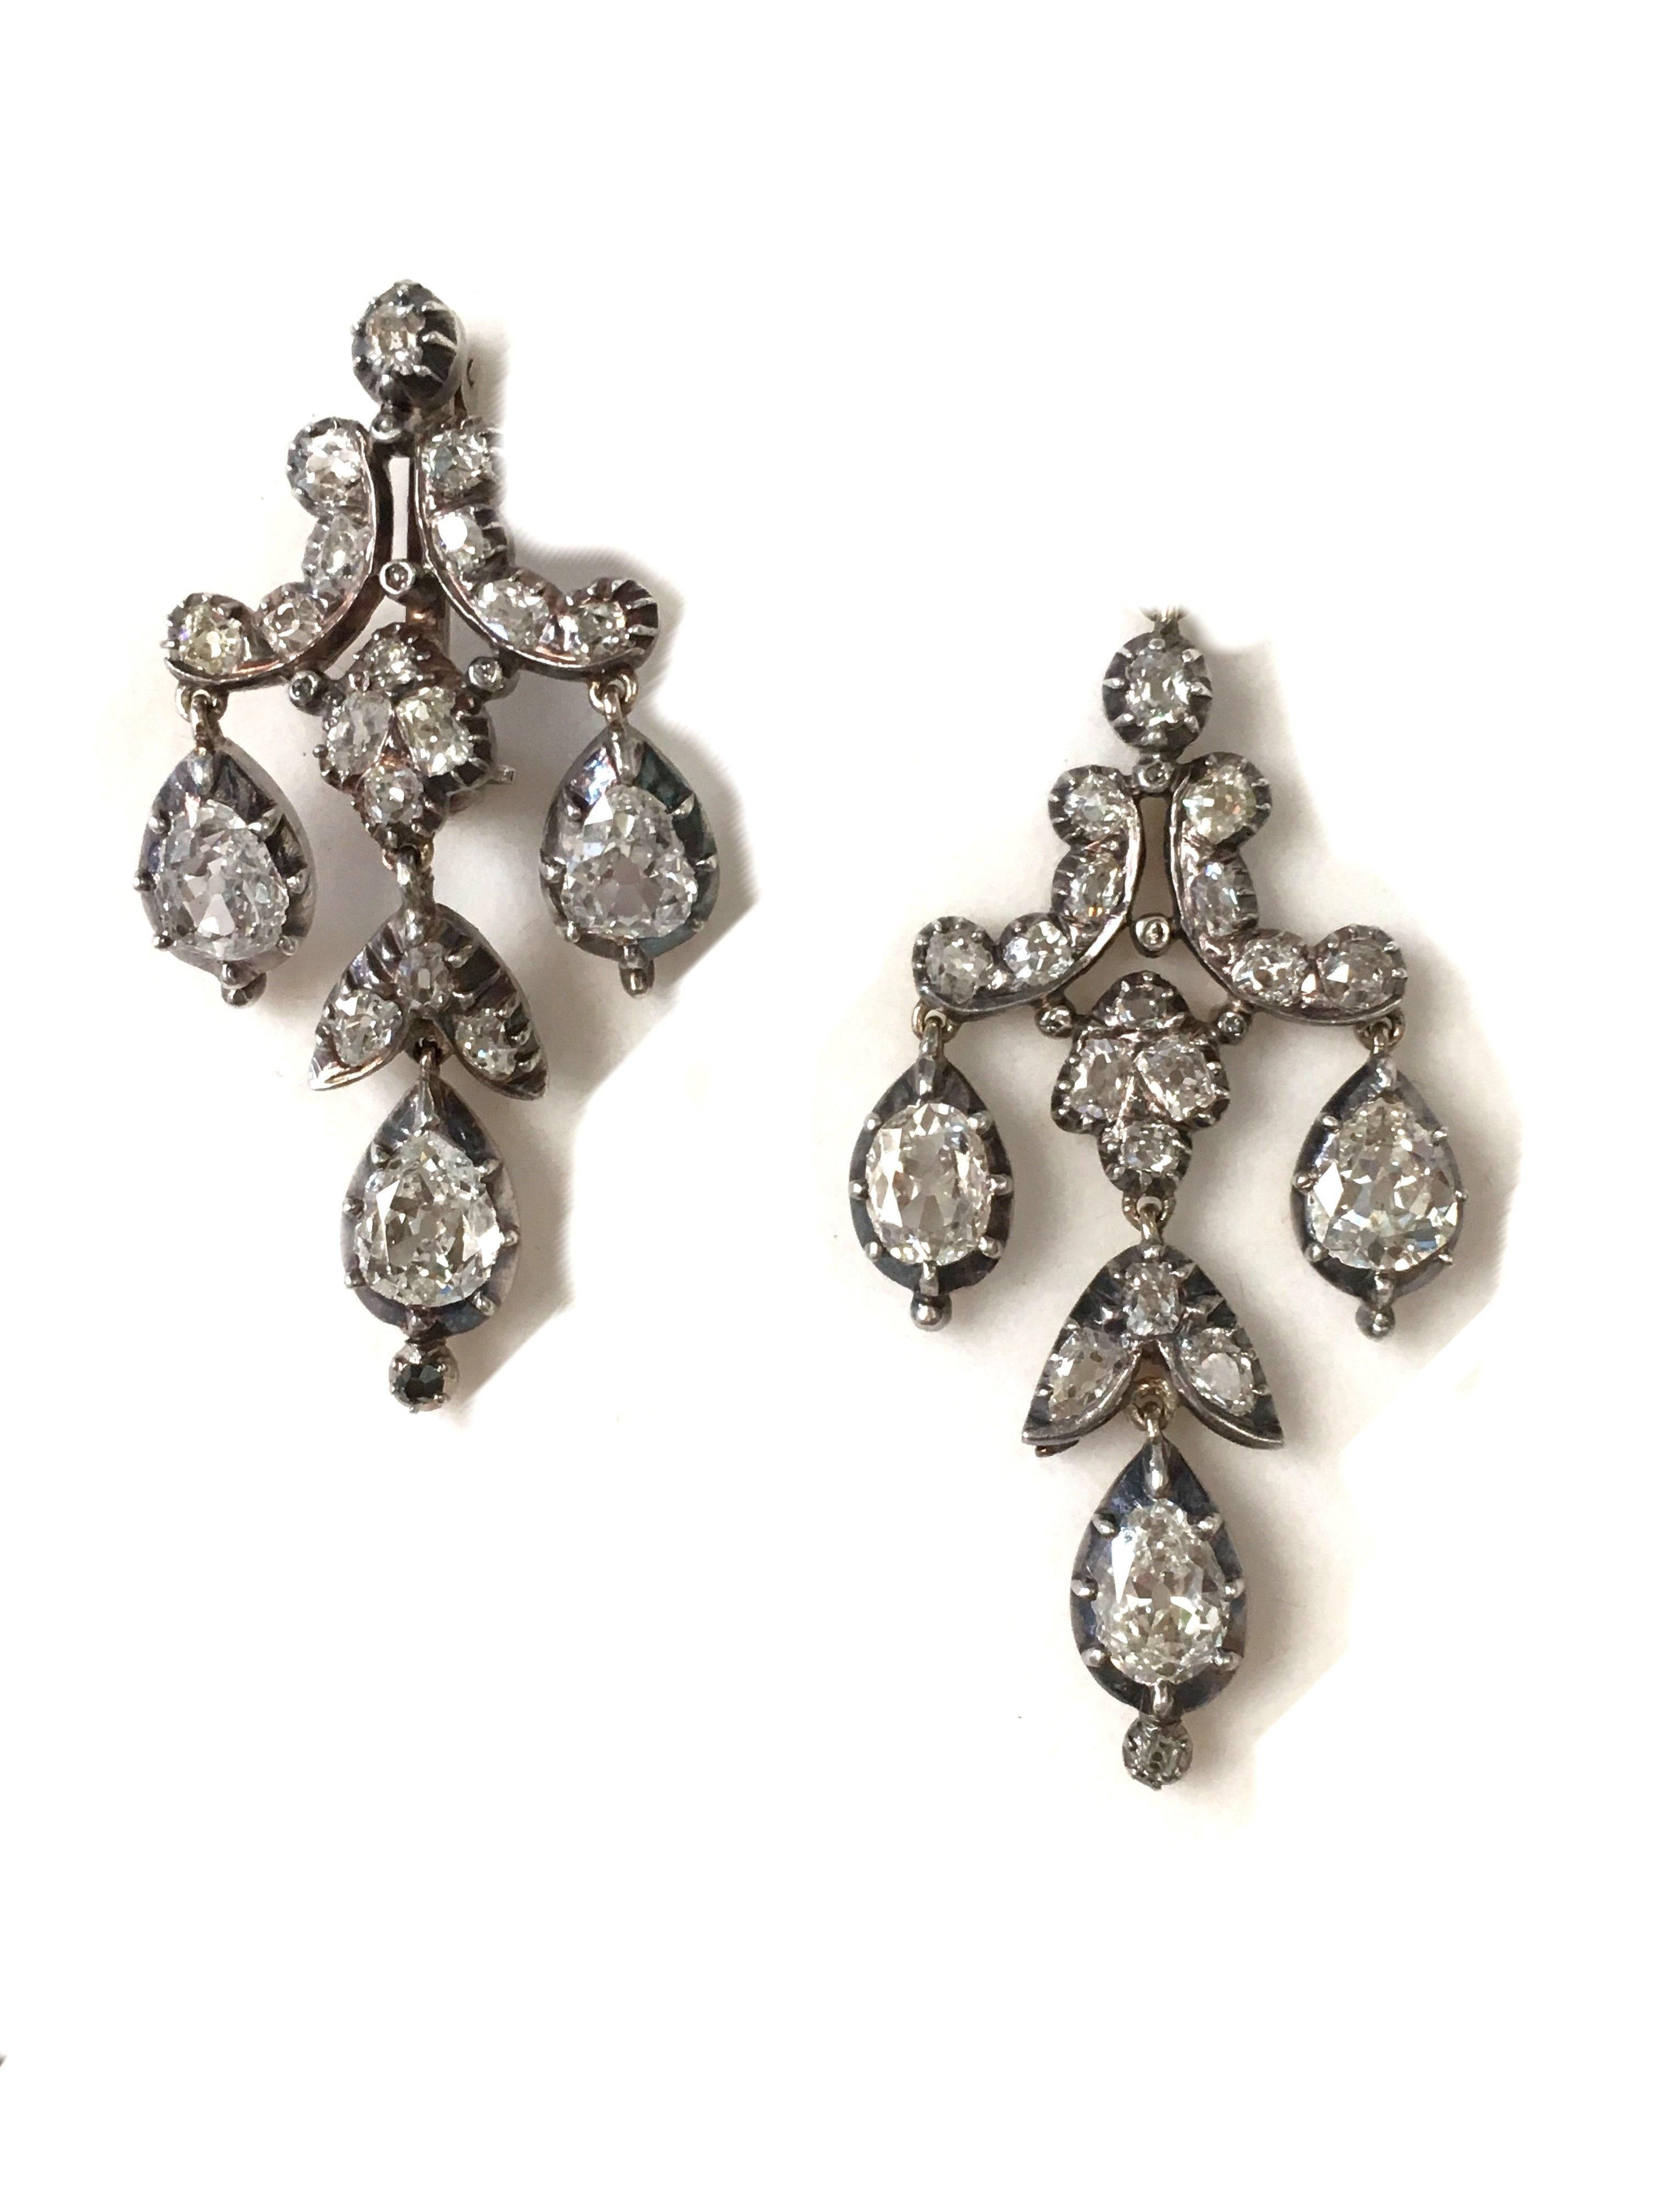 A pair of early 19th century chandelier drops set with diamonds. The diamonds set in silver cut down collet and silver setting work mounted on yellow gold backs. The pair are currently available as earrings with additional fixing to create a brooch